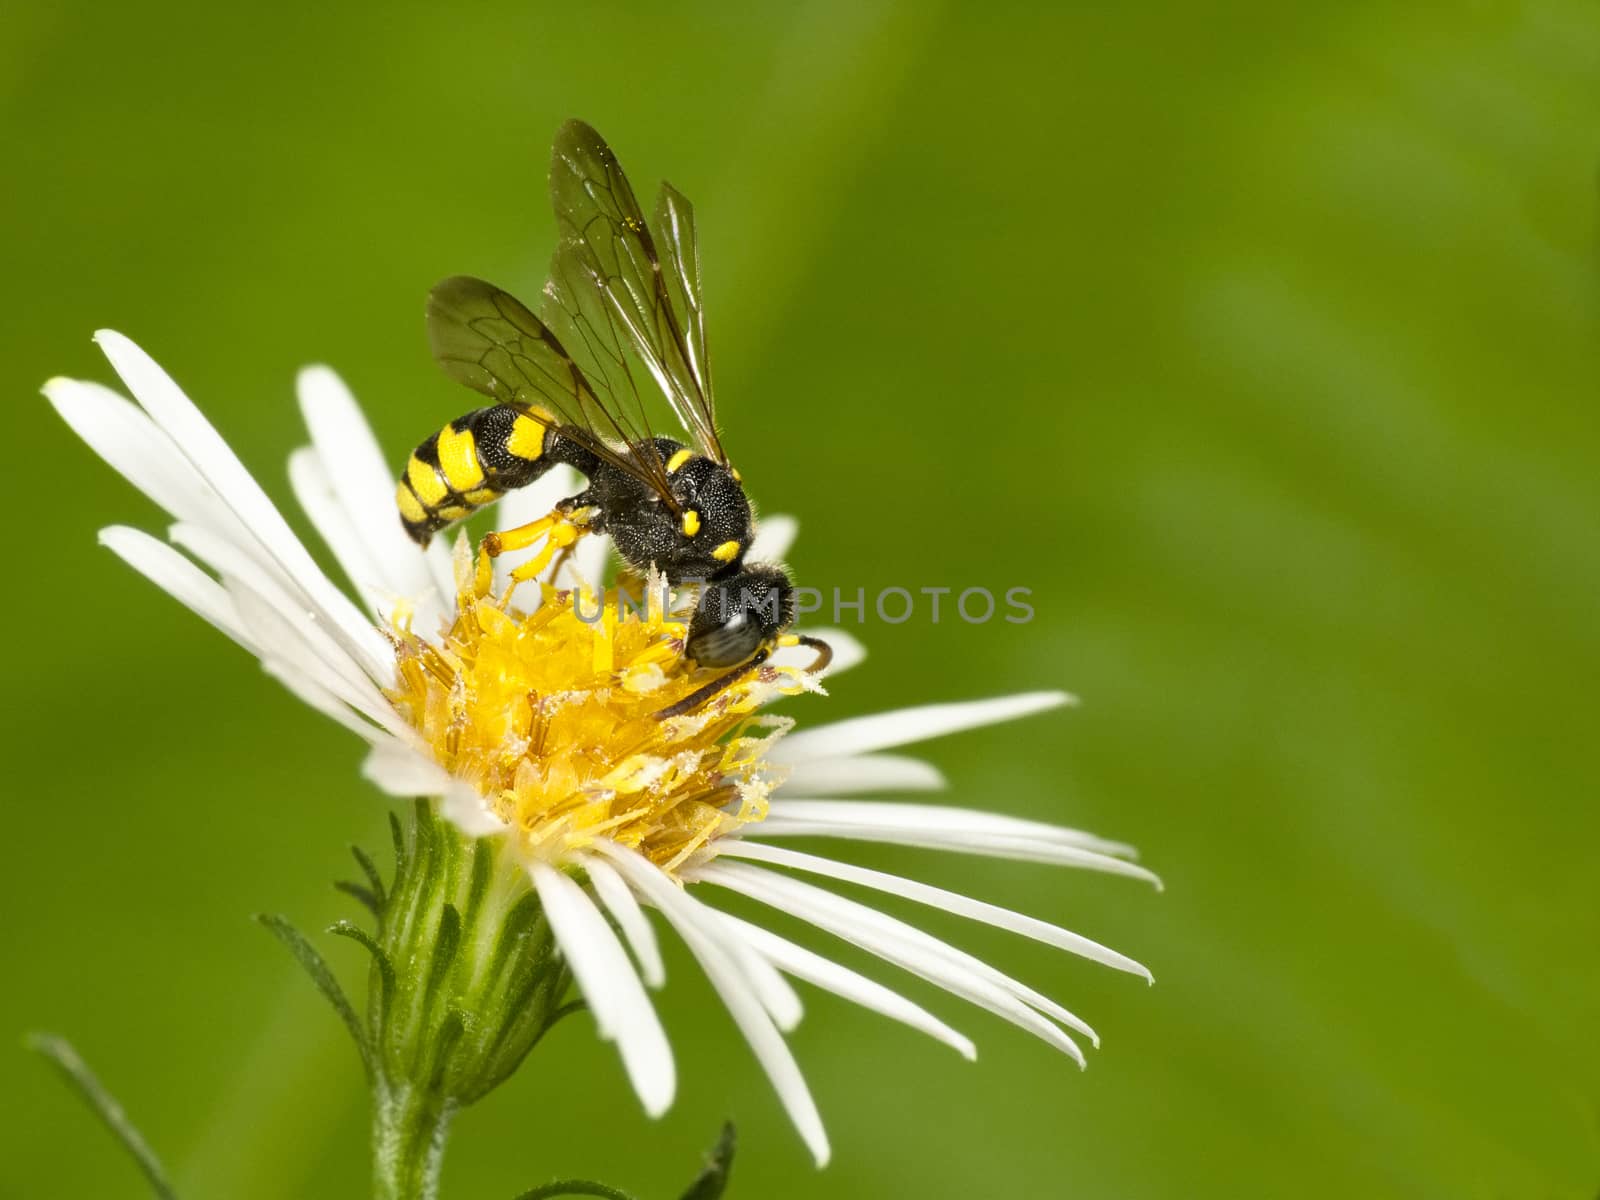 Small colorful wasp feeds on the flowers